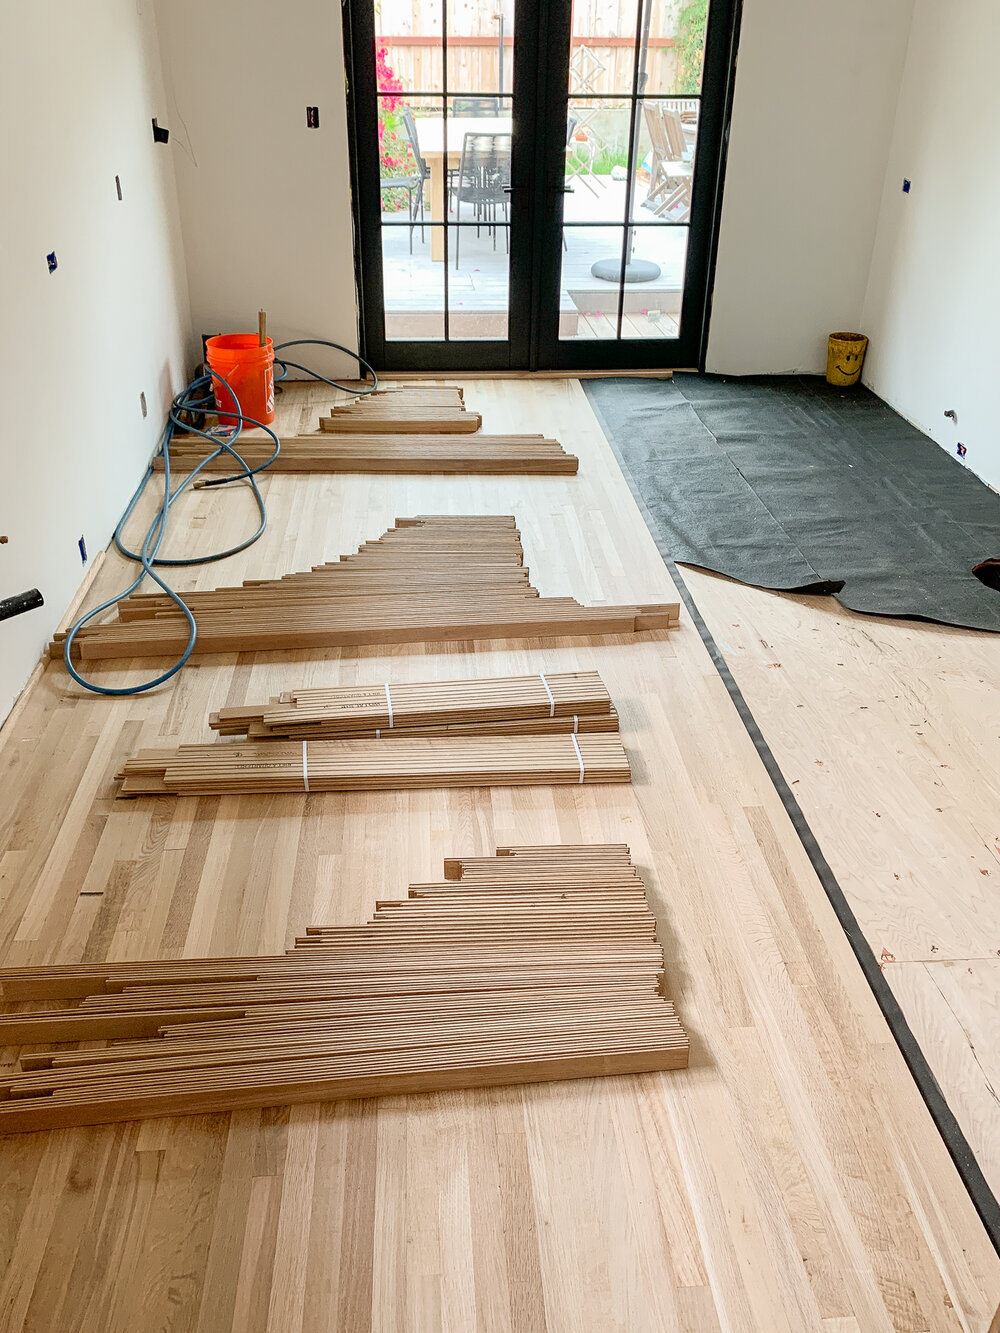 Installing New Hardwood Floors In Our, How To Install New Hardwood Floors